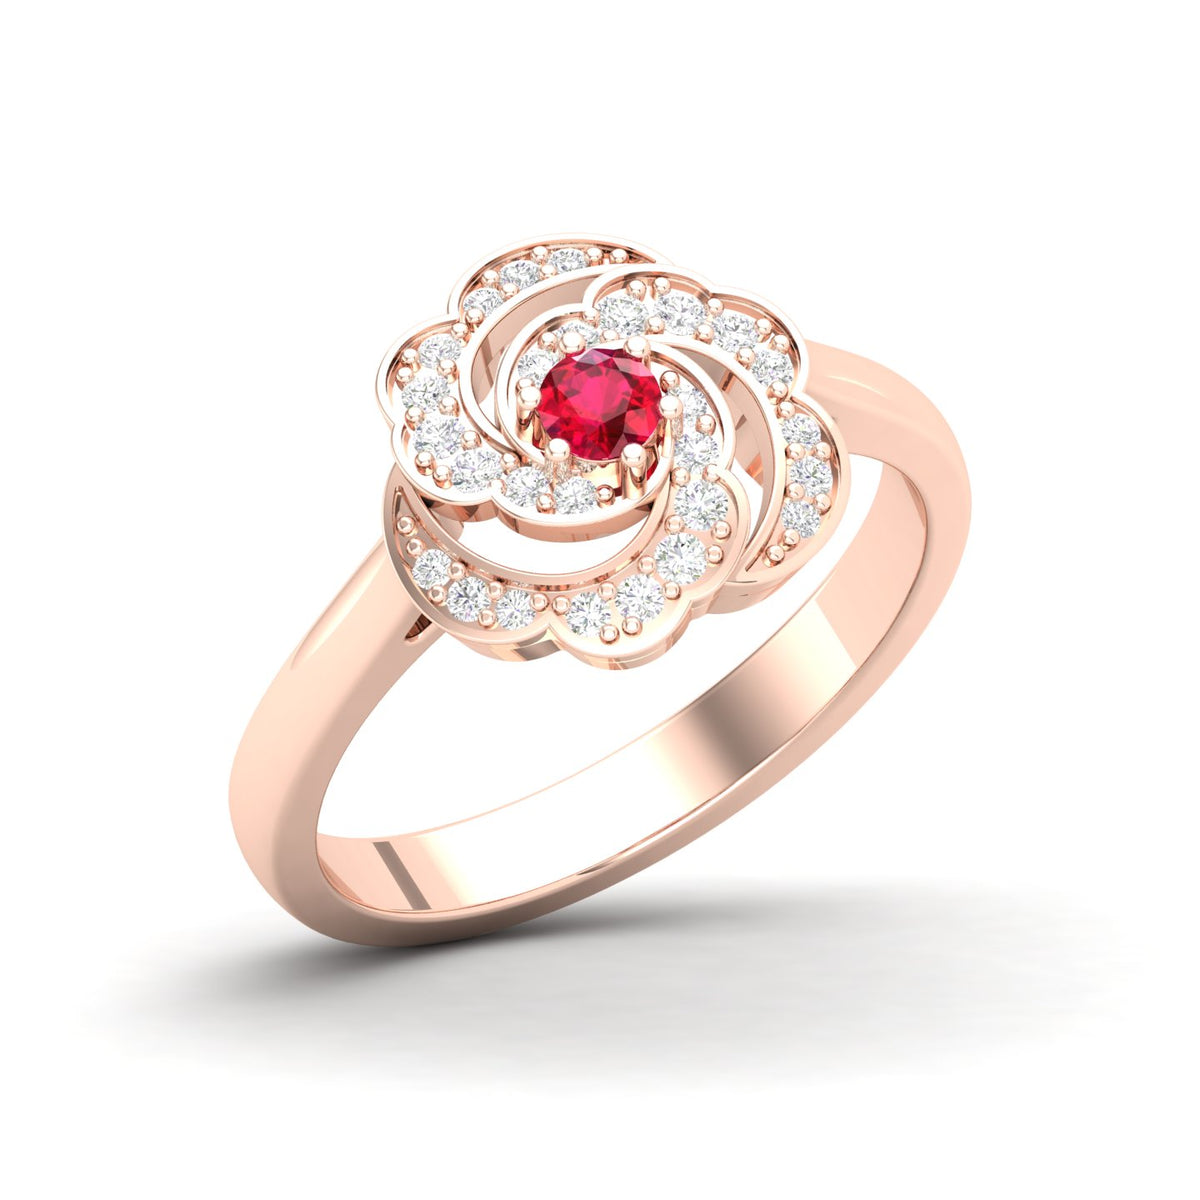 Maurya Ruby Rose Promise Ring with Accent Diamonds